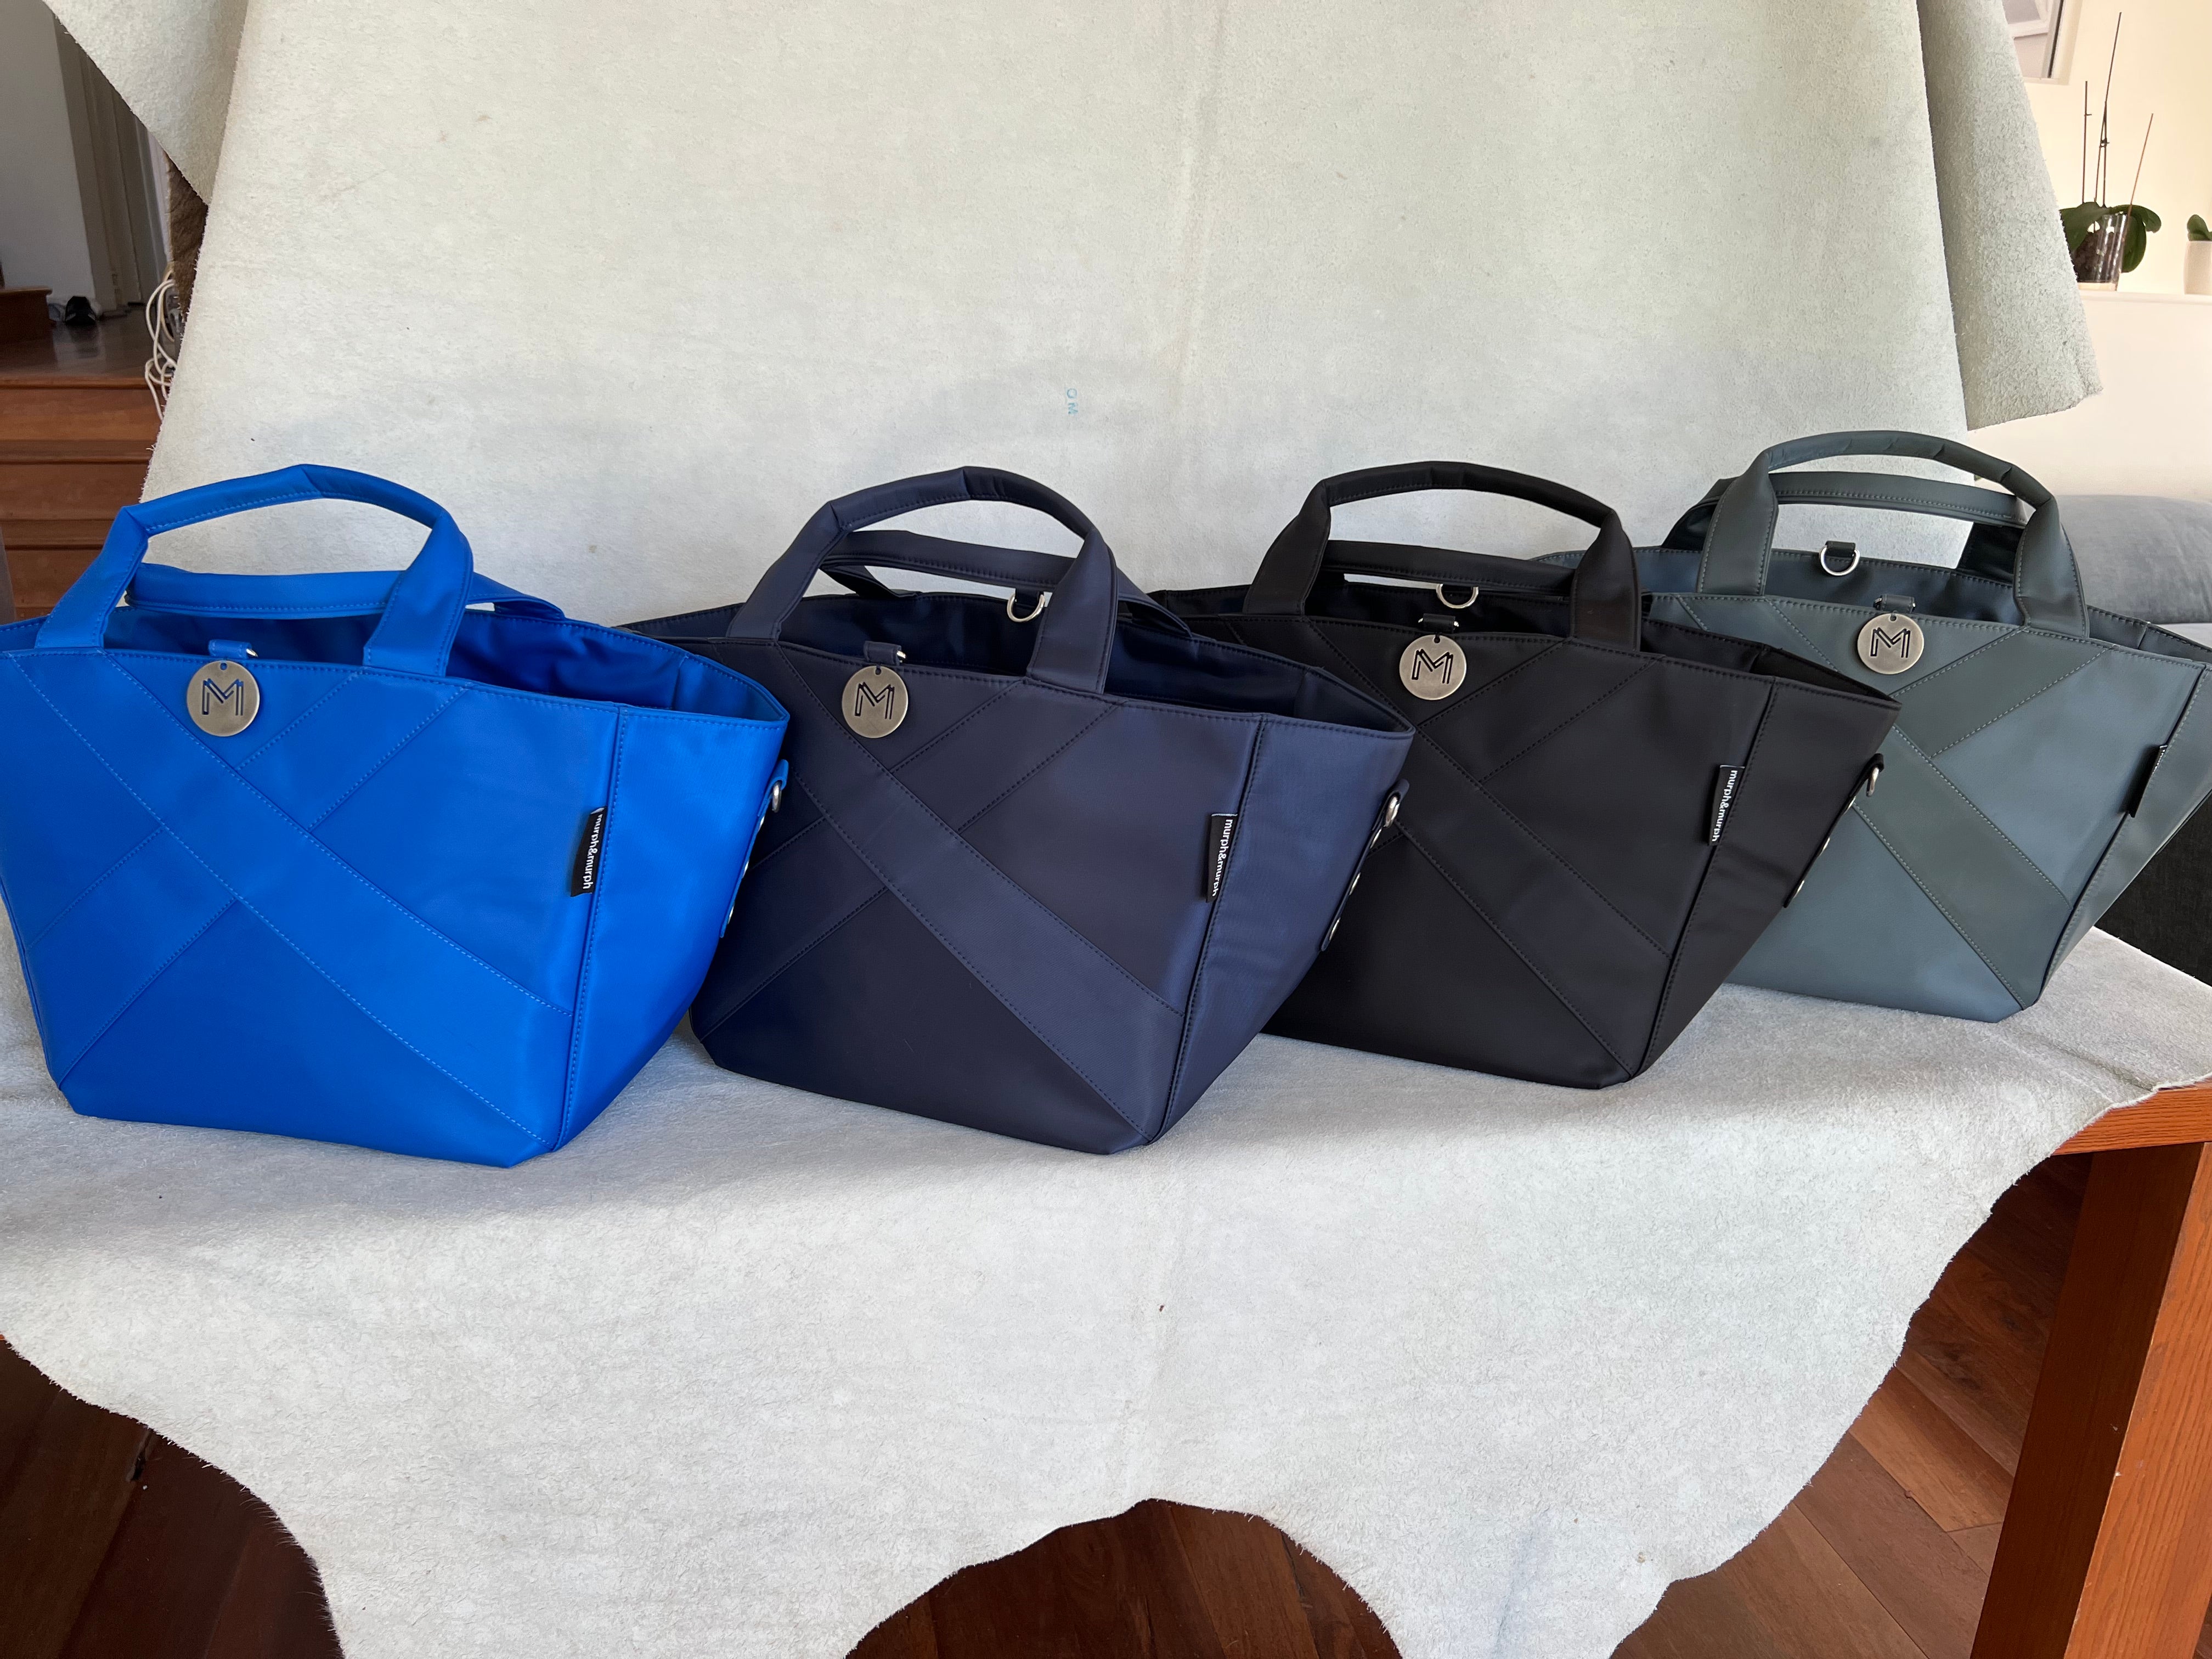 Which Cove Bag Do I Need?